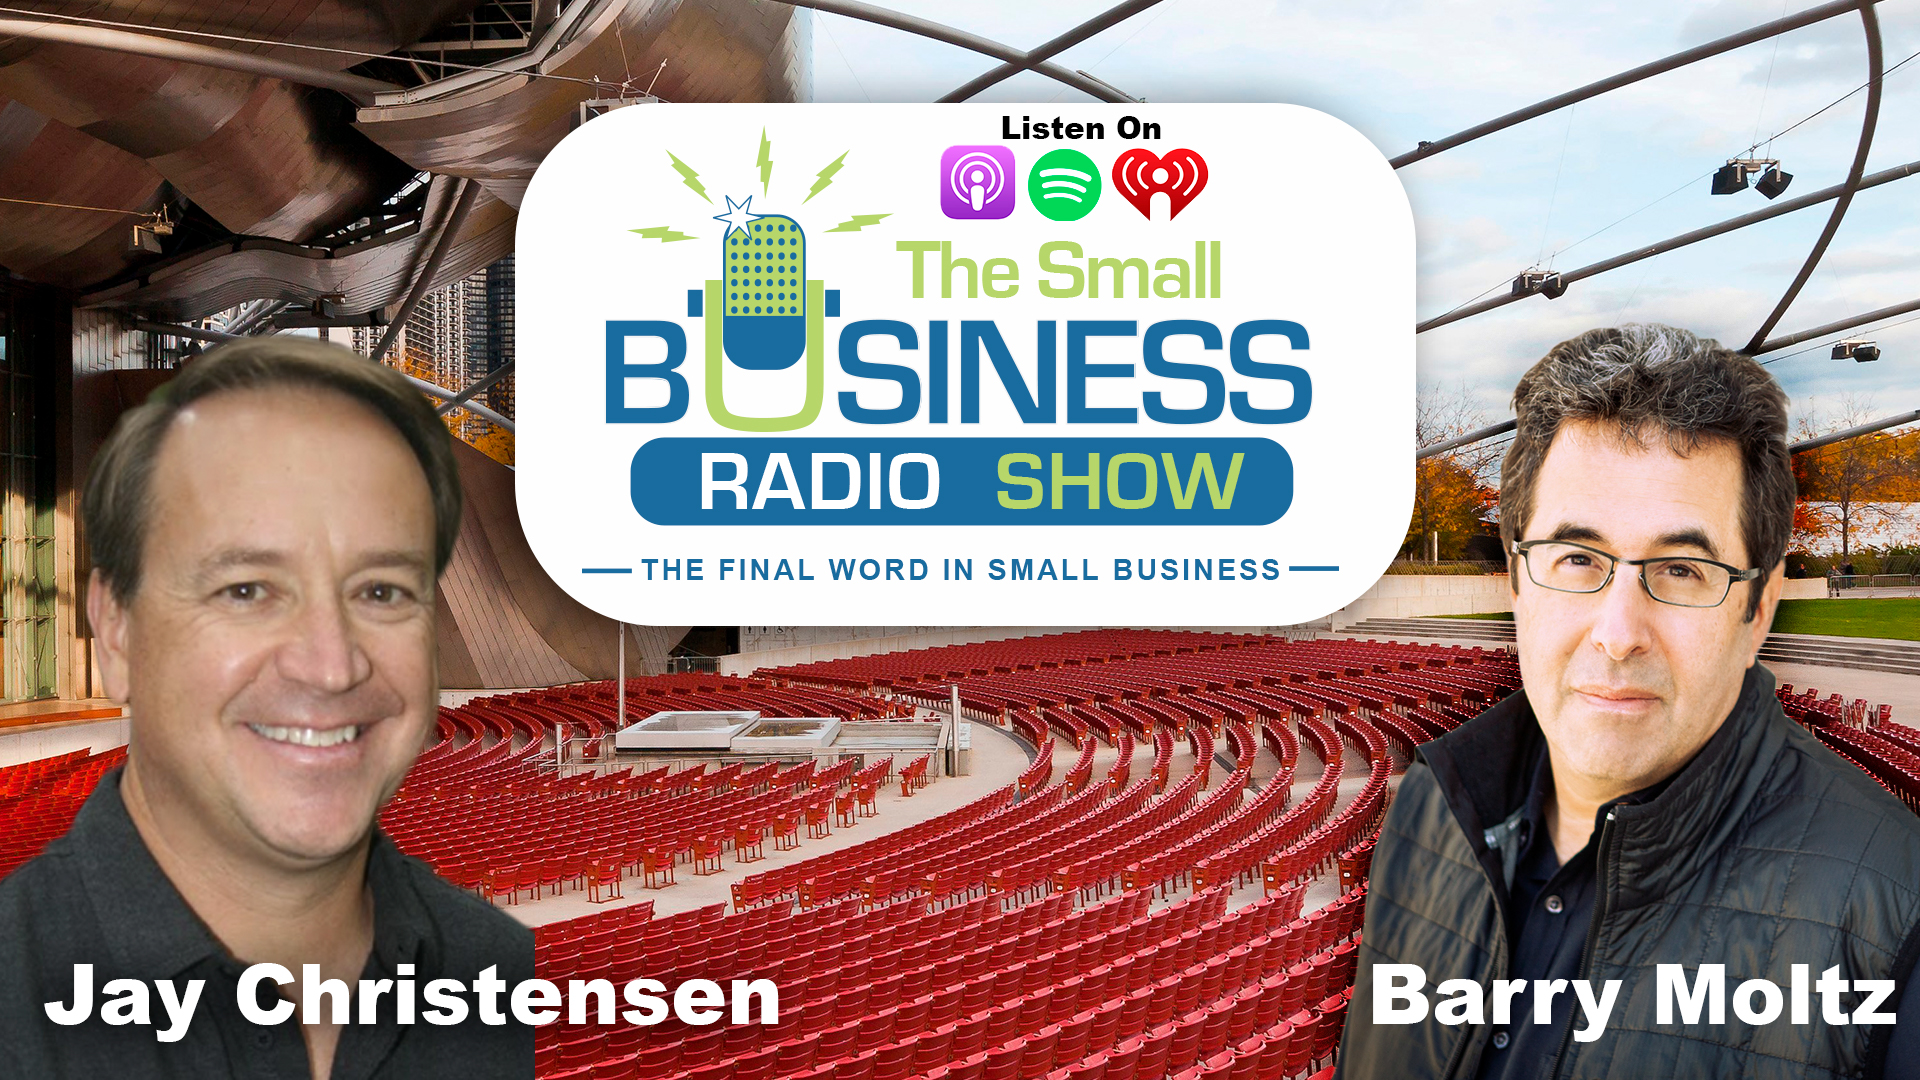 Jay Christensen on The Small Business Radio Show